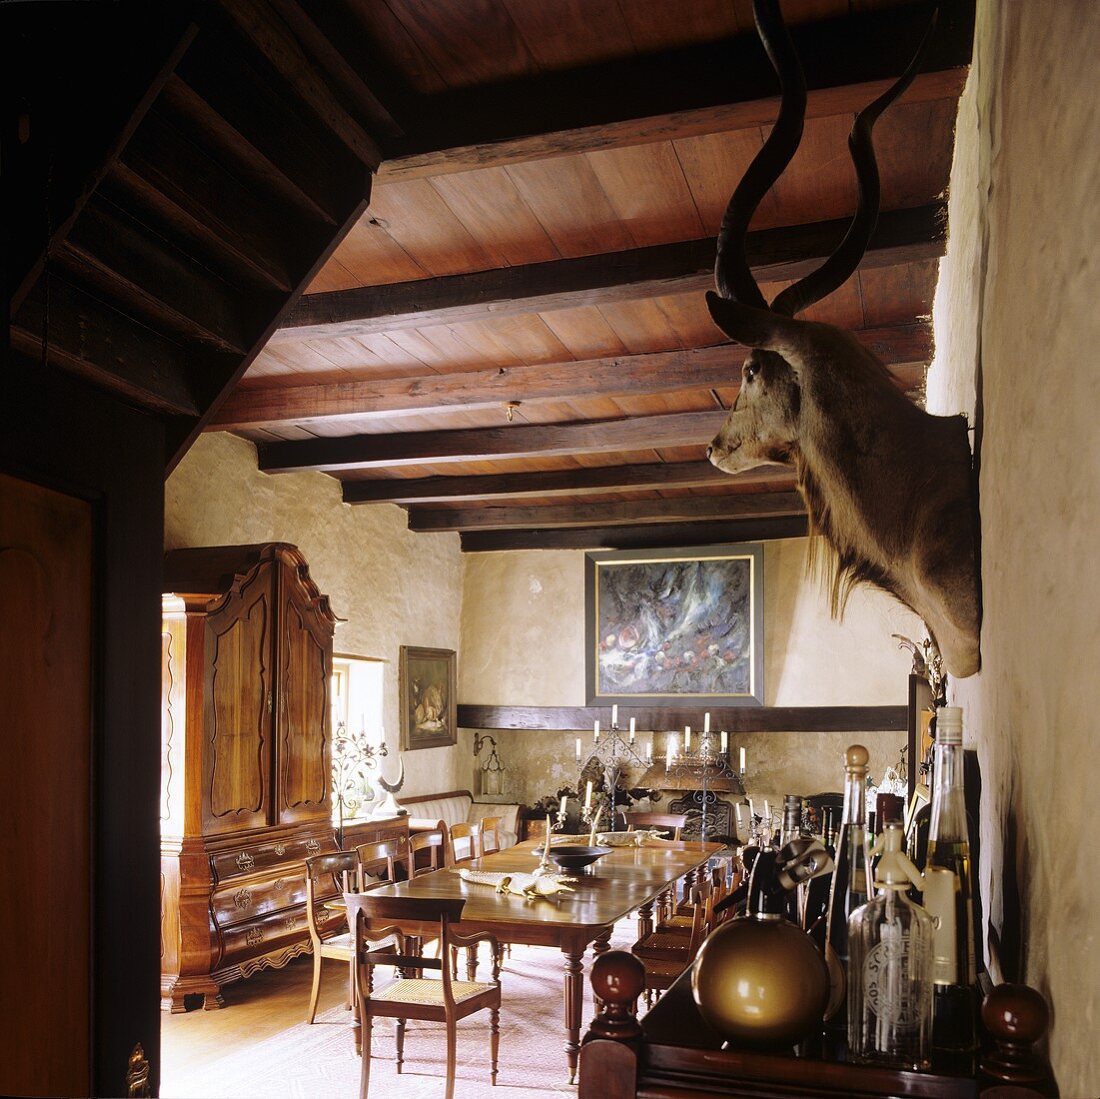 A dining room in a South African country house - an antique dining table, a wood beam ceiling and a stuffed animal head on the wall